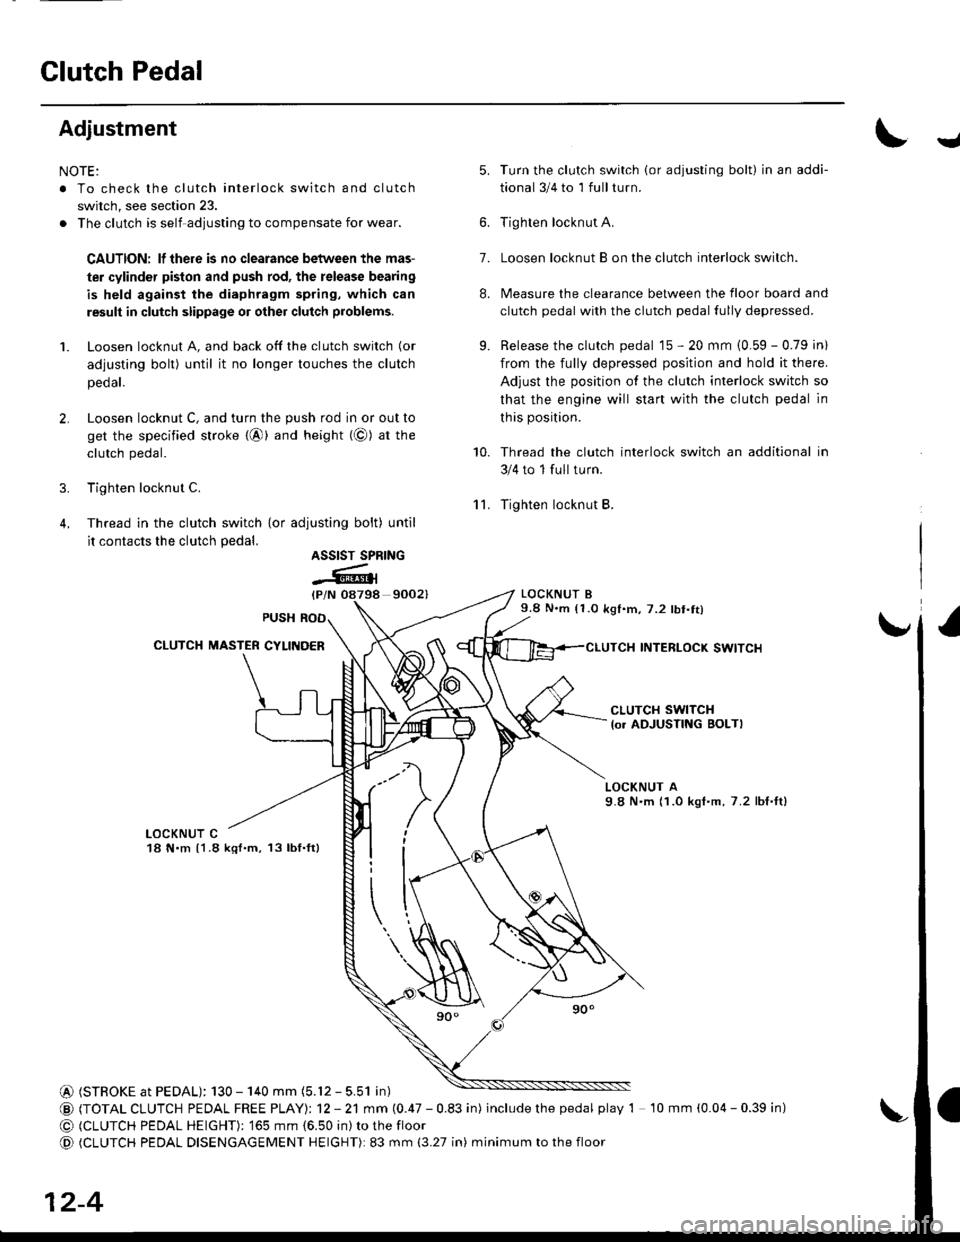 HONDA CIVIC 1998 6.G Workshop Manual Glutch Pedal
Adjustment
NOTE:
. To check the clutch interlock switch and clutch
switch, see section 23.
. The clutch is self-adjusting to compensate for wear.
CAUTION: lf there is no clearance between